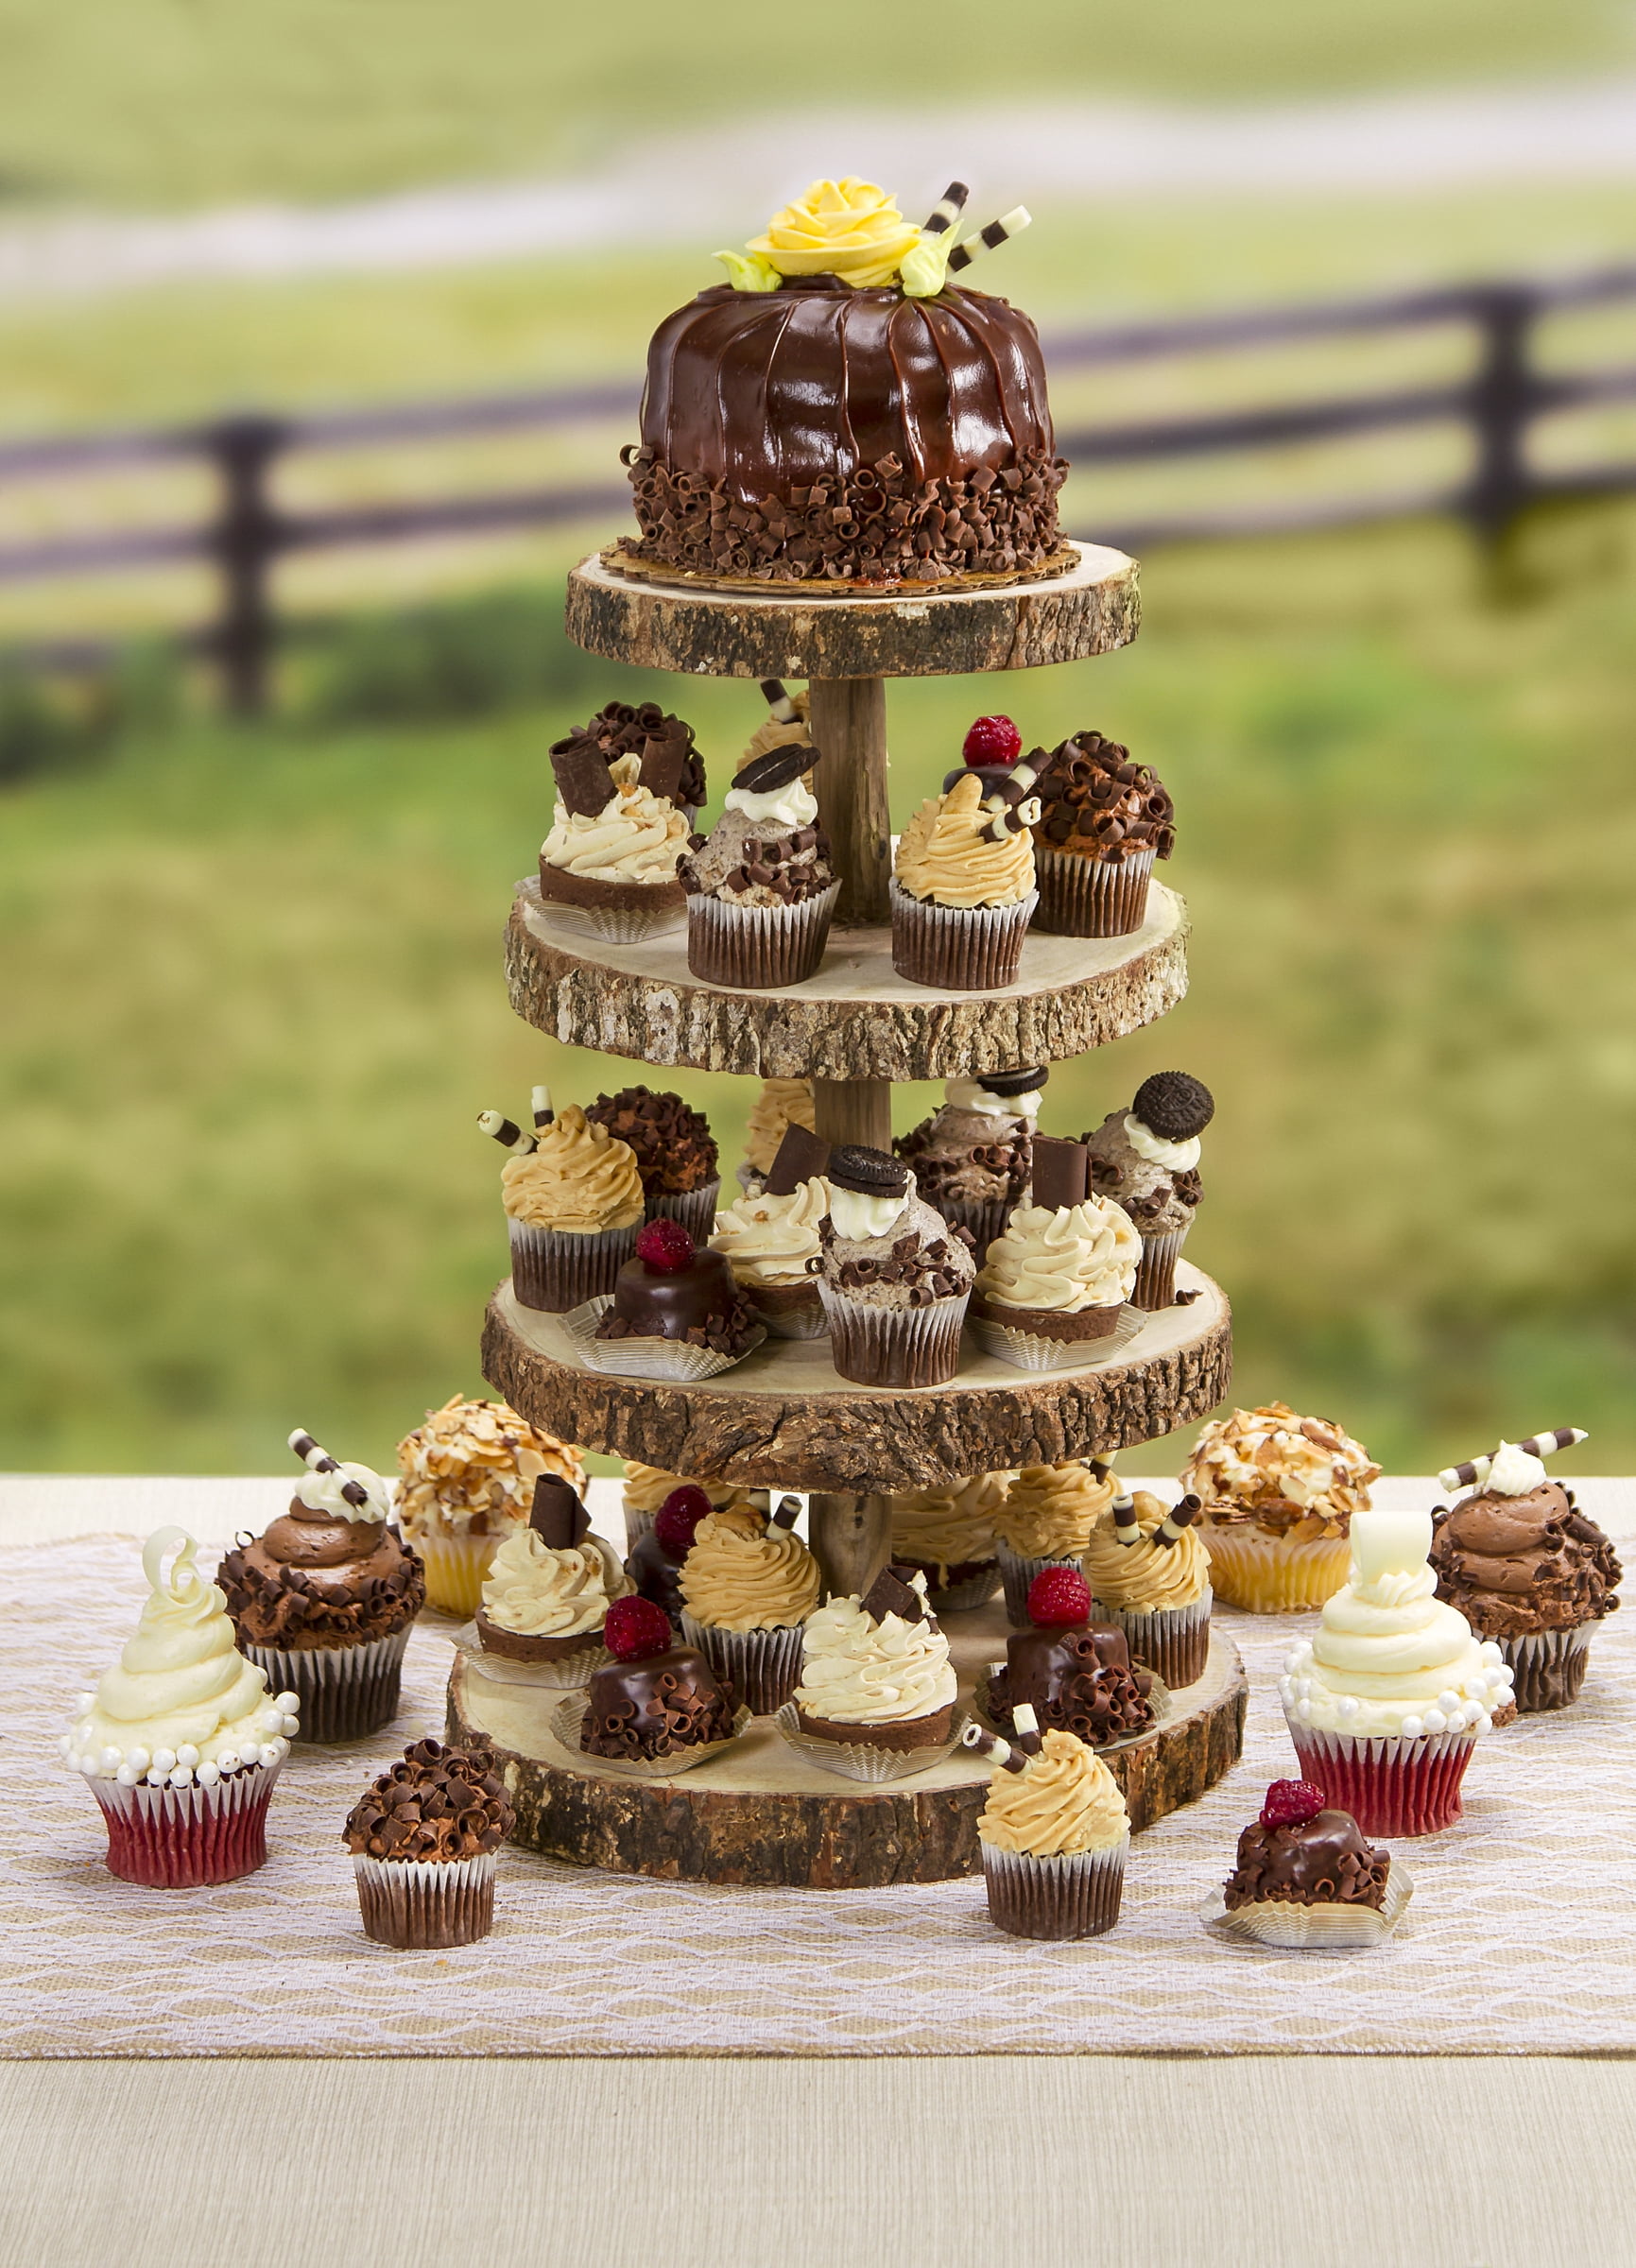 4 Tier Cupcake Stand Wood Display Stand Wedding Dessert Stand Rustic Plant Stand Tiered Cupcake Stand Rustic Tiered Wood Shelf